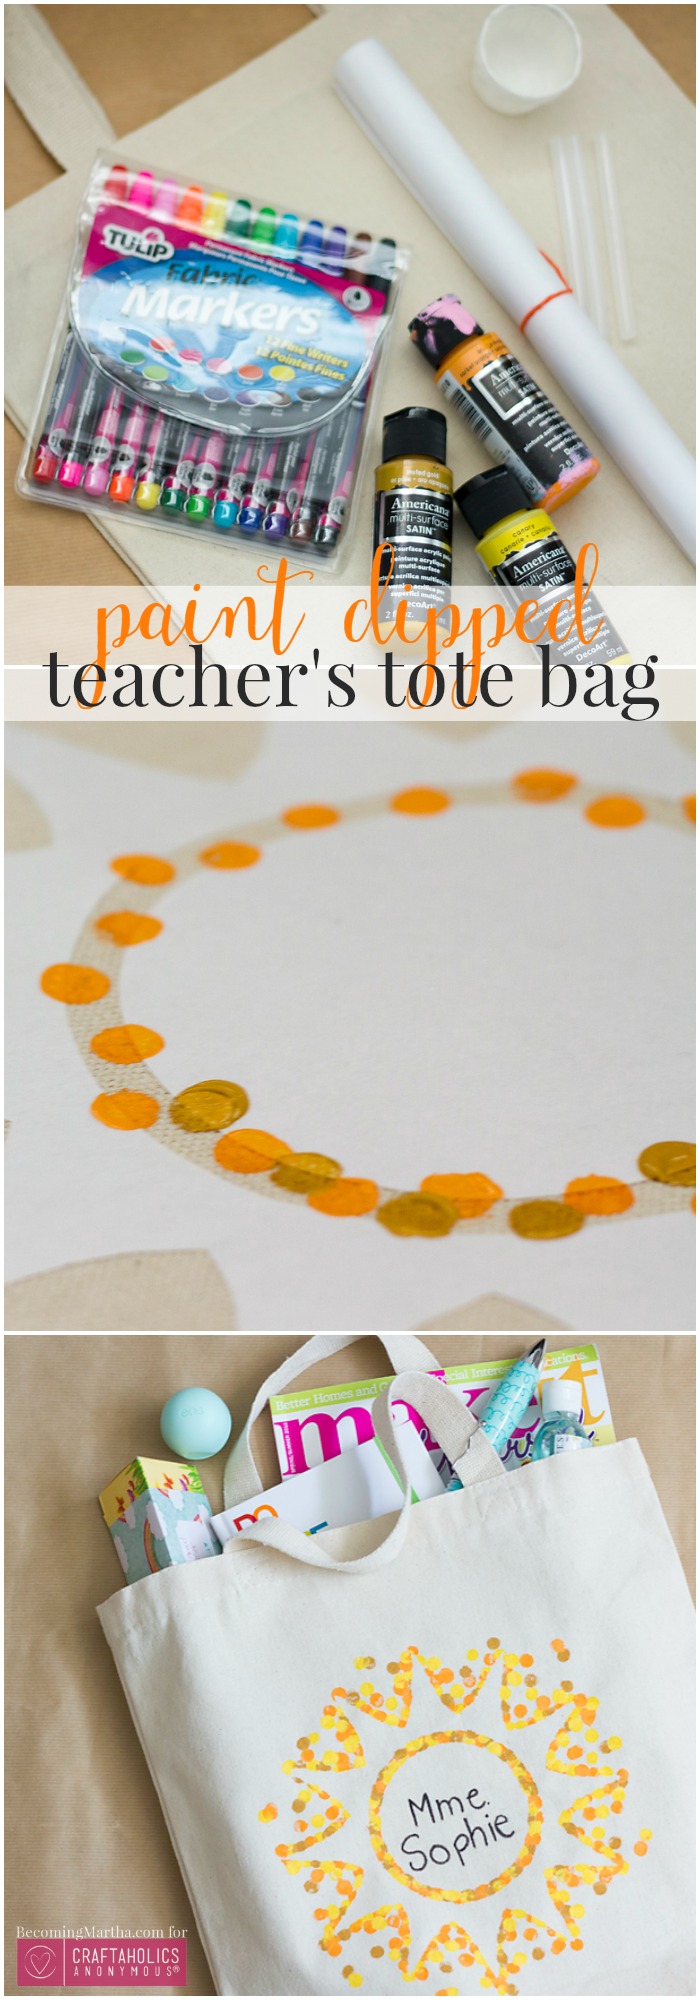 Easy Last Minute Teacher Appreciation Gift Idea! Personalize this canvas tote for your favorite teacher this year!